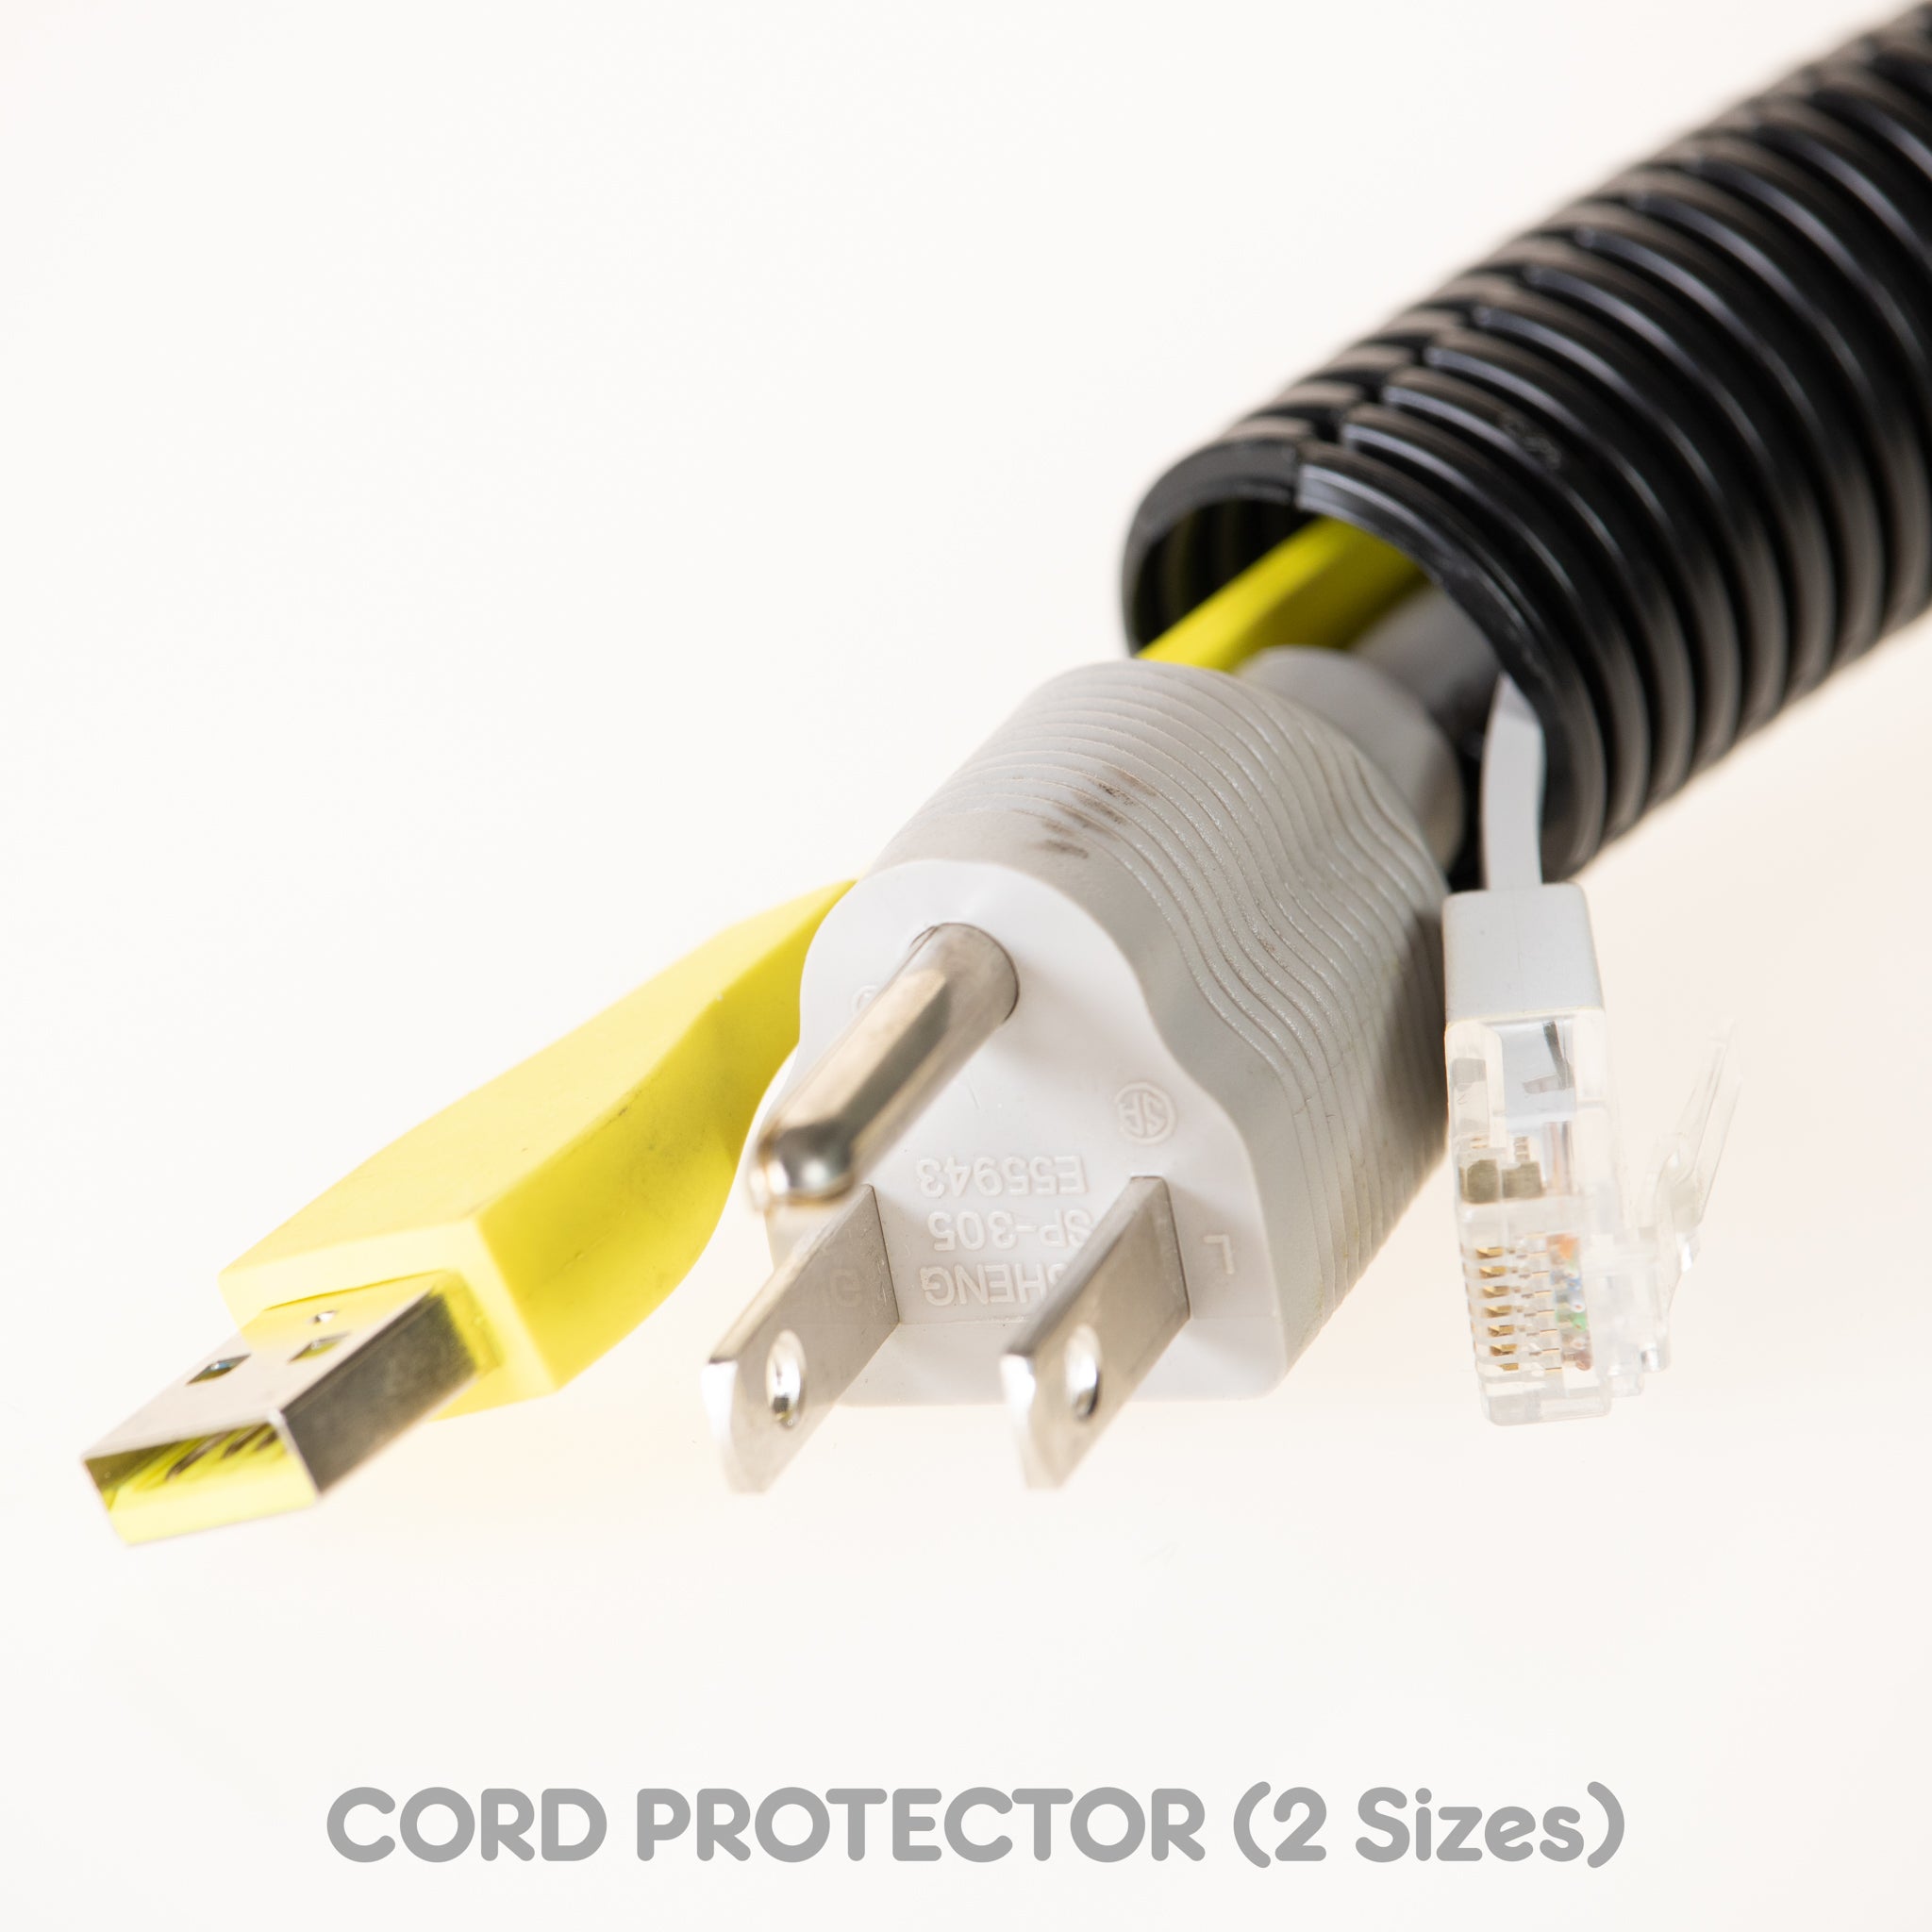  Rancco Cable Protector/Wire Repair/Pet Chew Cable